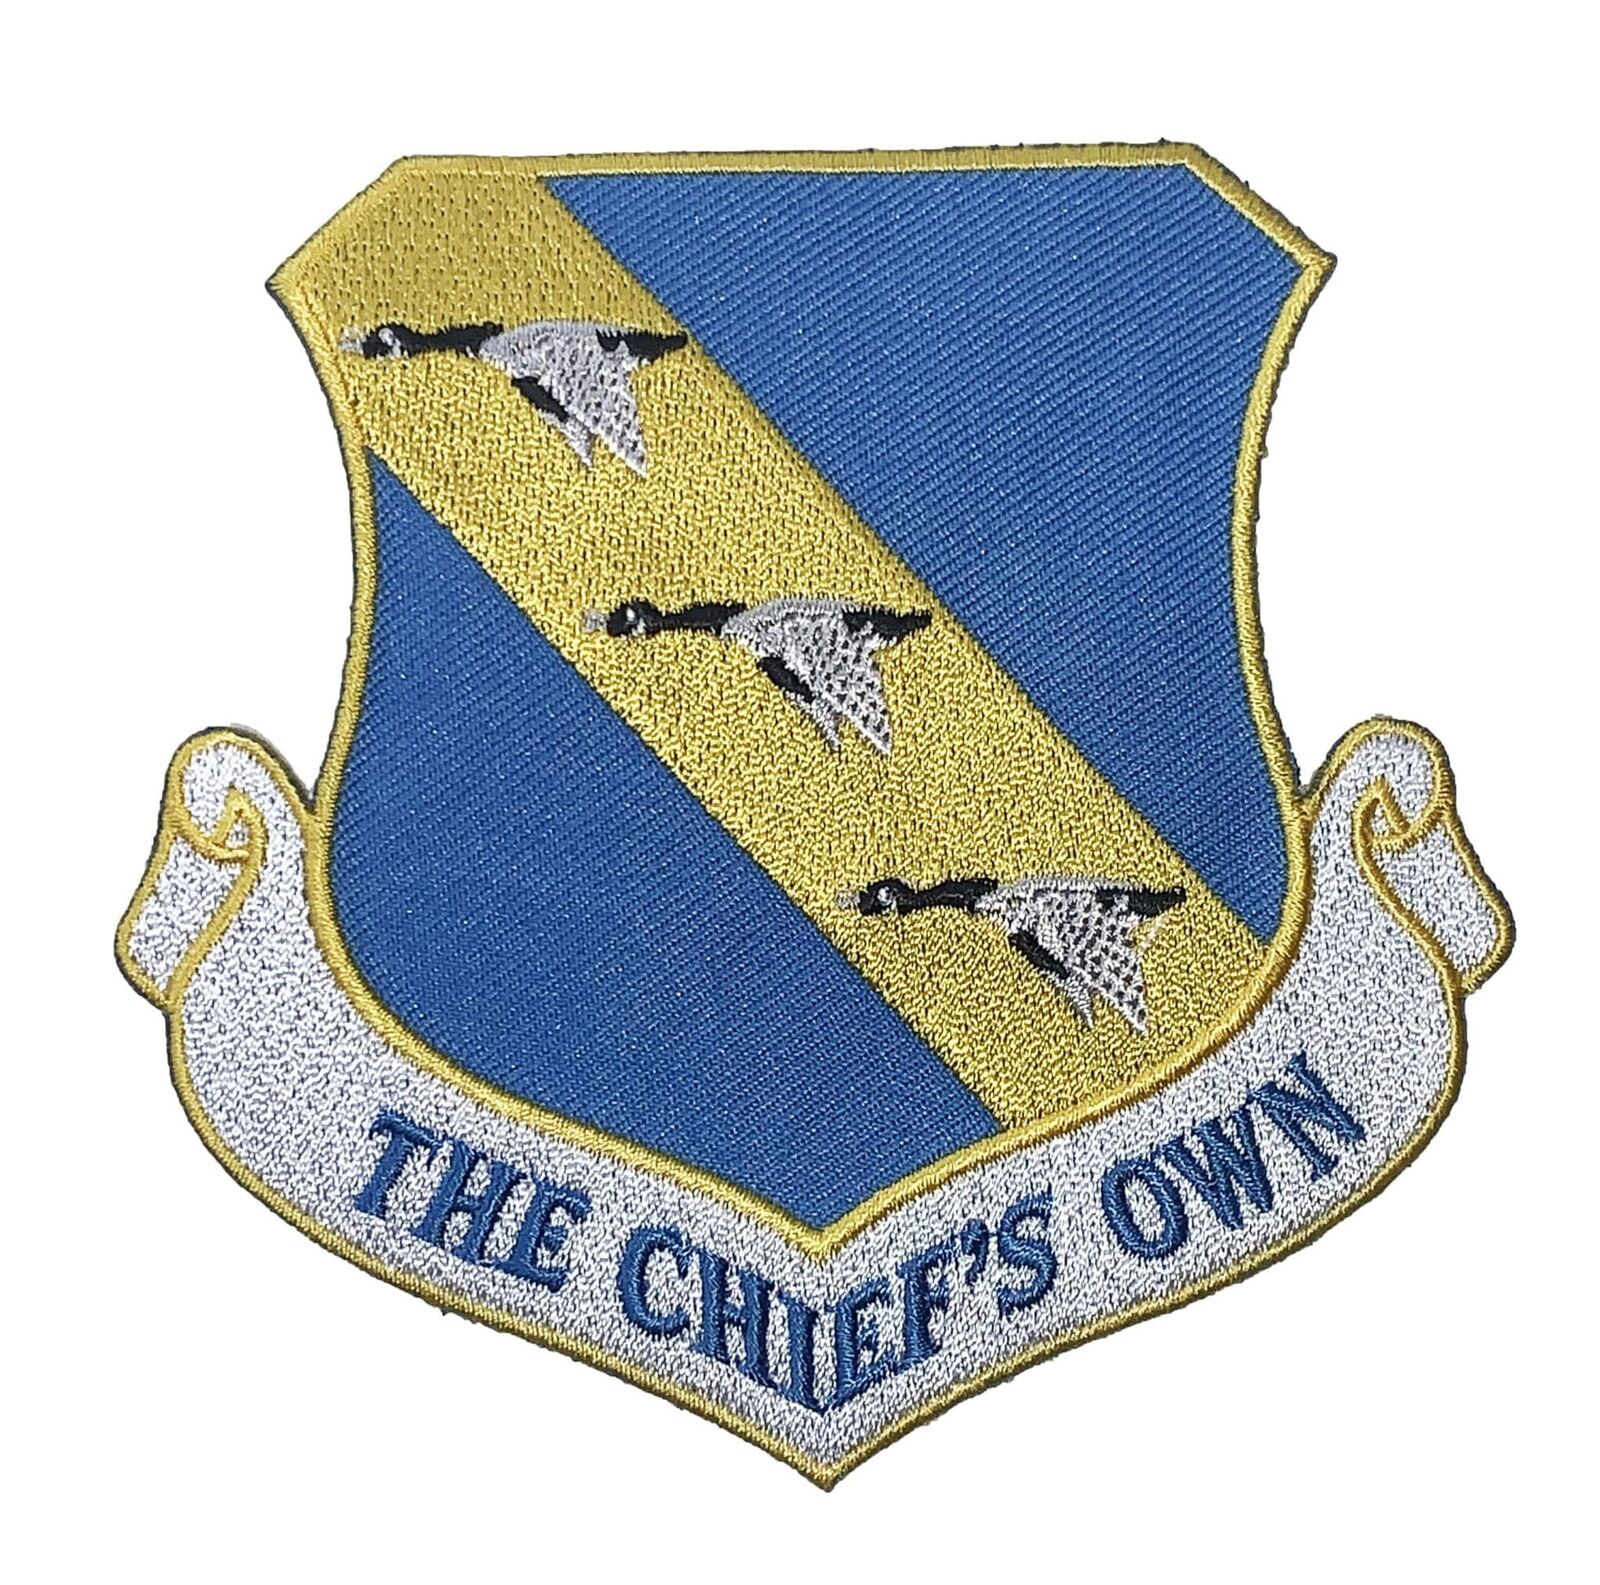 THE CHIEF'S OWN 11th Wing Patch – Plastic Backing